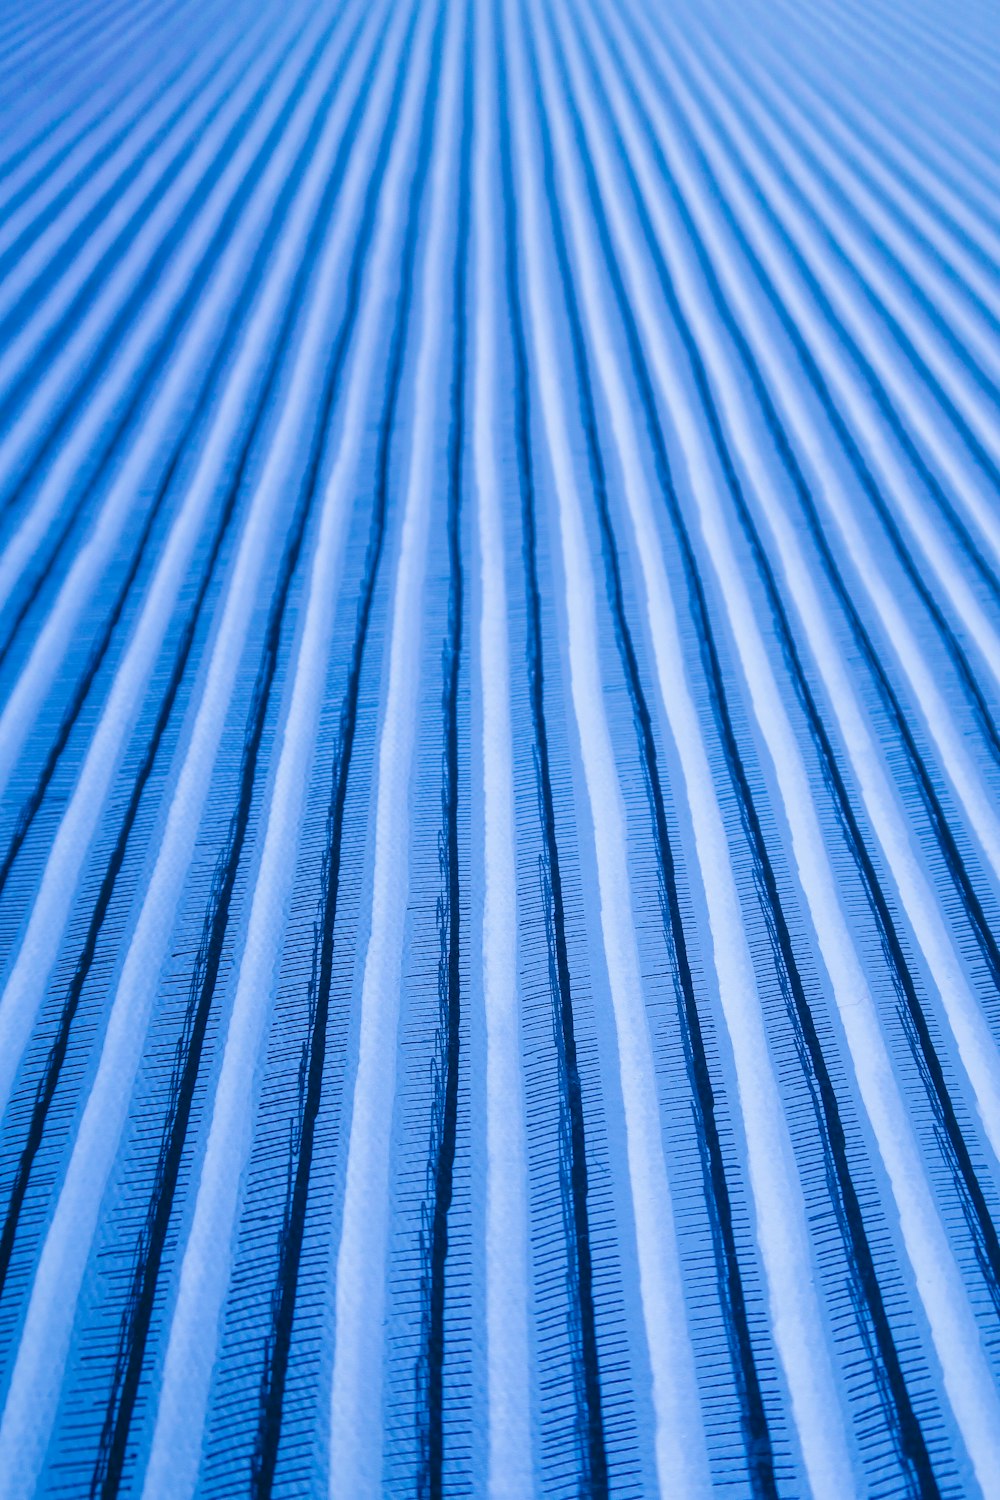 a close up of a blue and white striped surface